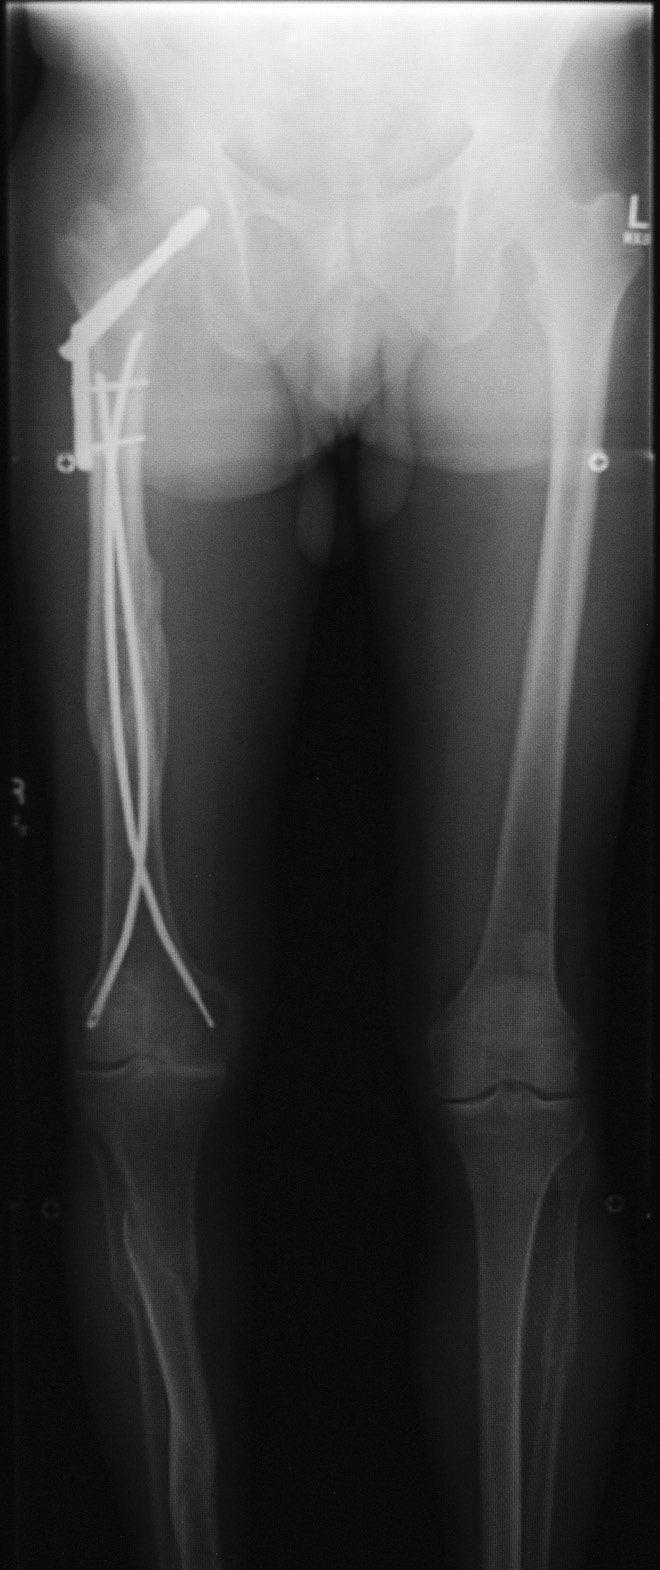 Fibular Intramedullary Nails: Indications, Trends, and Recent Results |  Podiatry Today